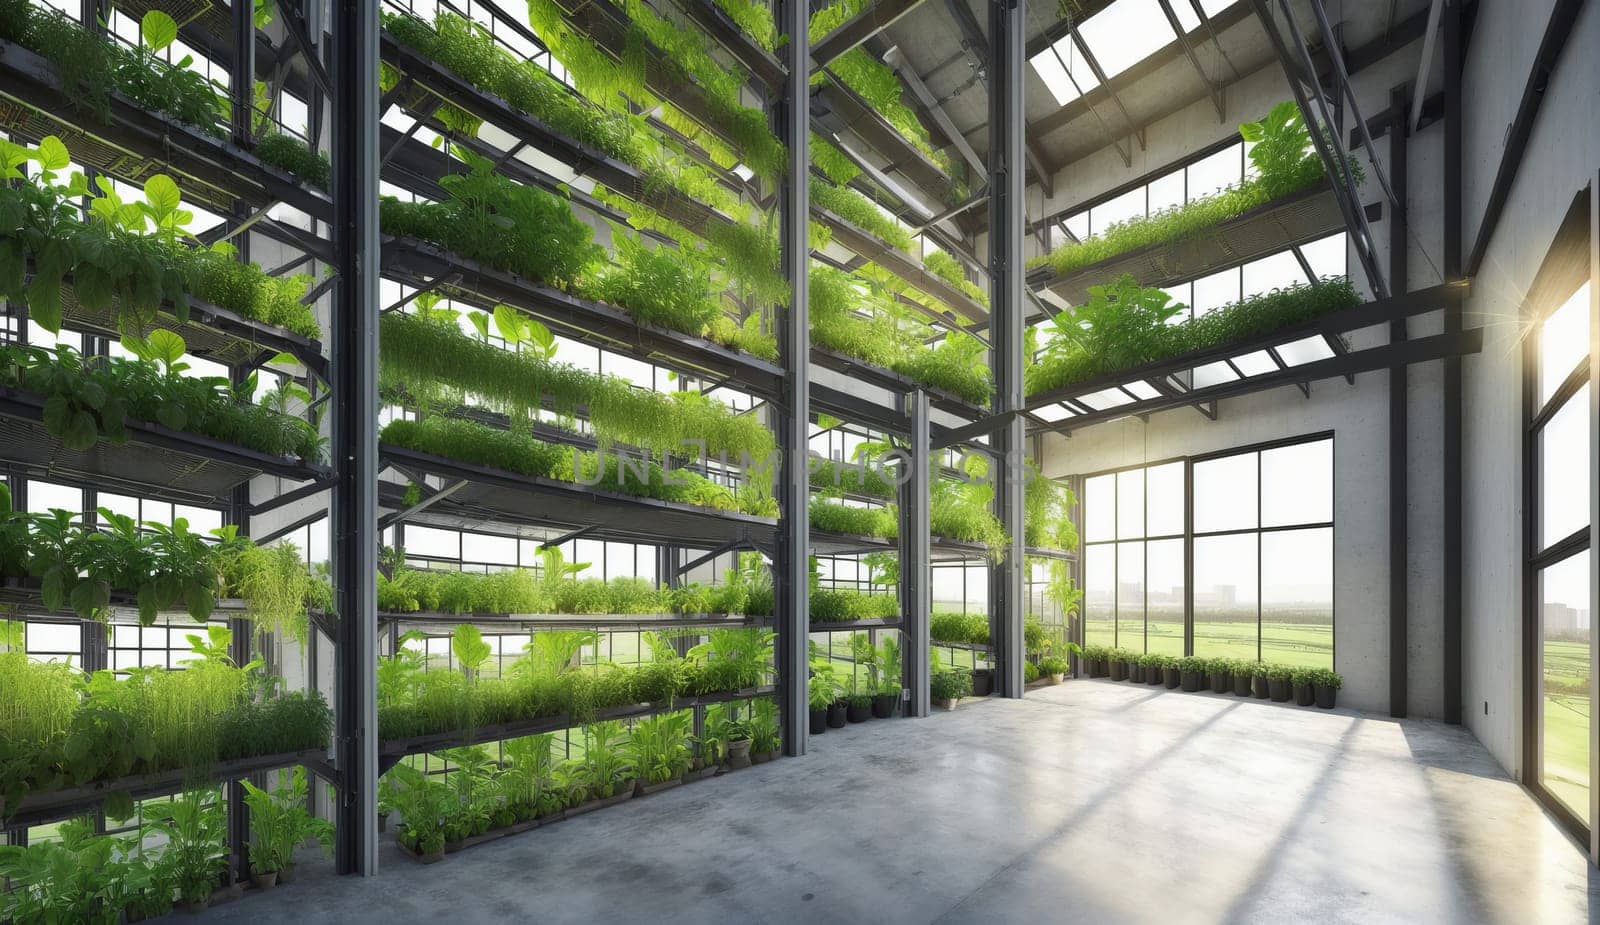 Spacious building interior with abundant green plants covering the walls by DCStudio